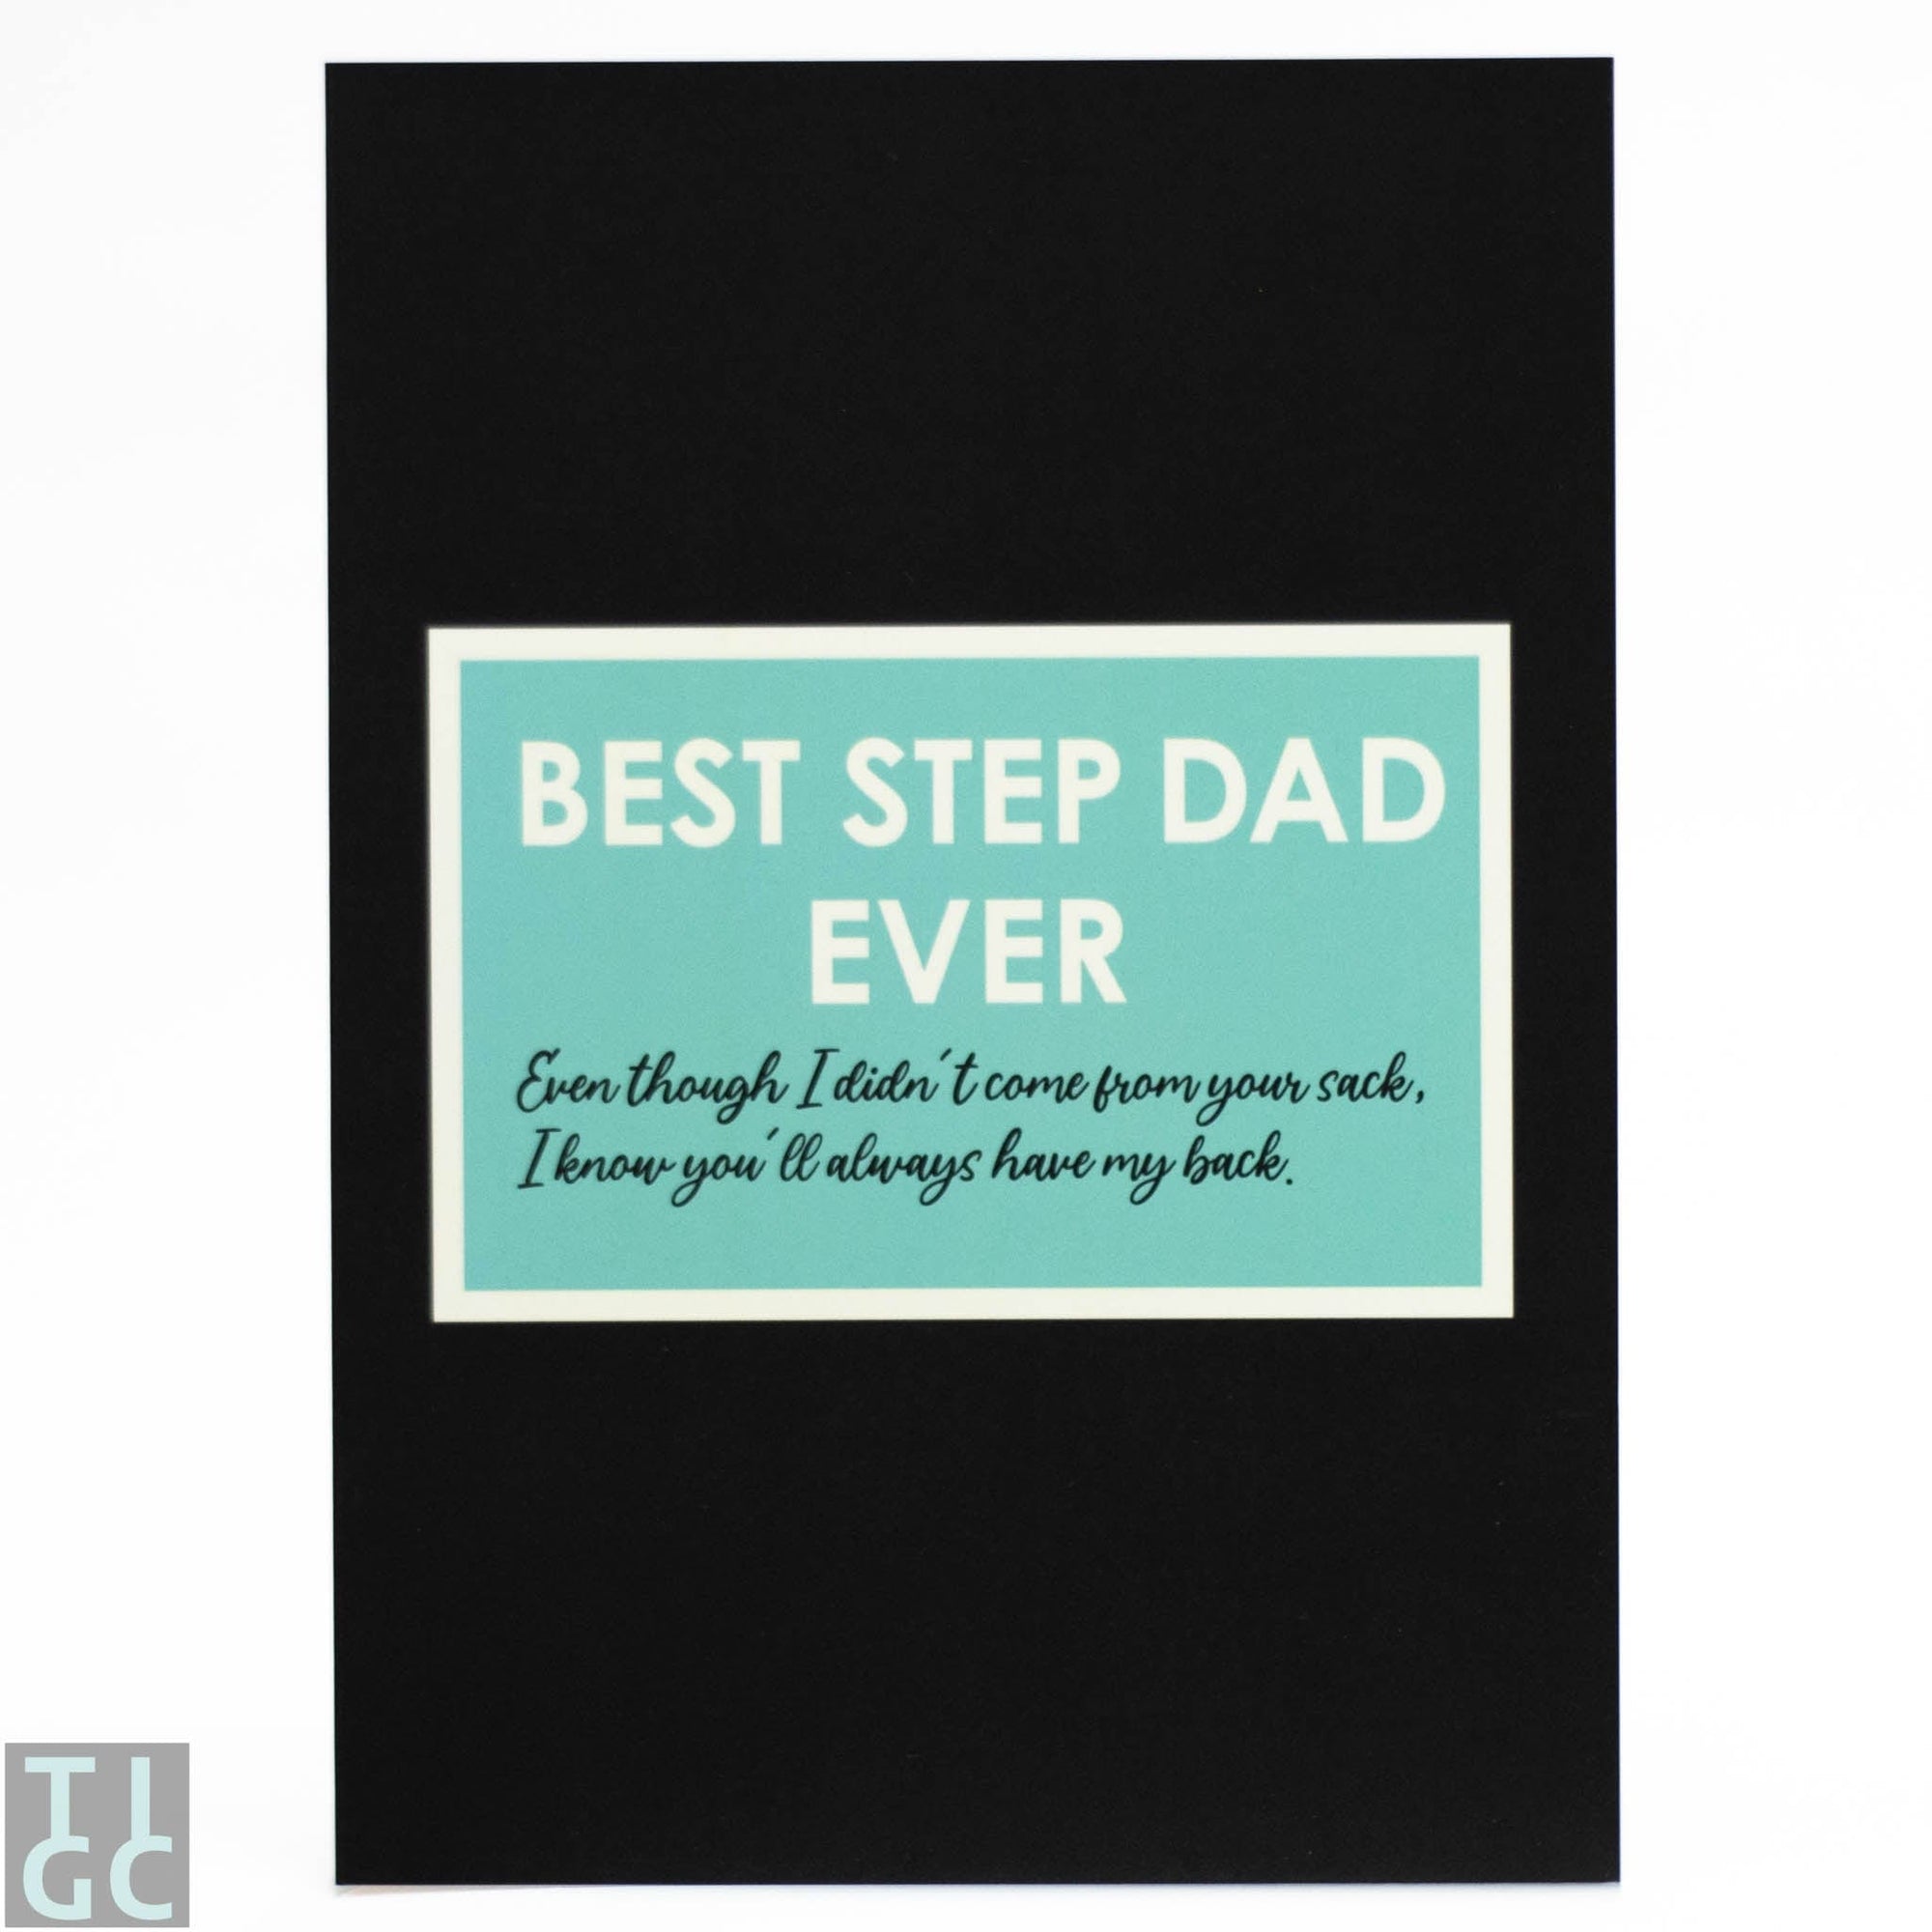 TIGC The Inappropriate Gift Co Best Stepdad Ever Card